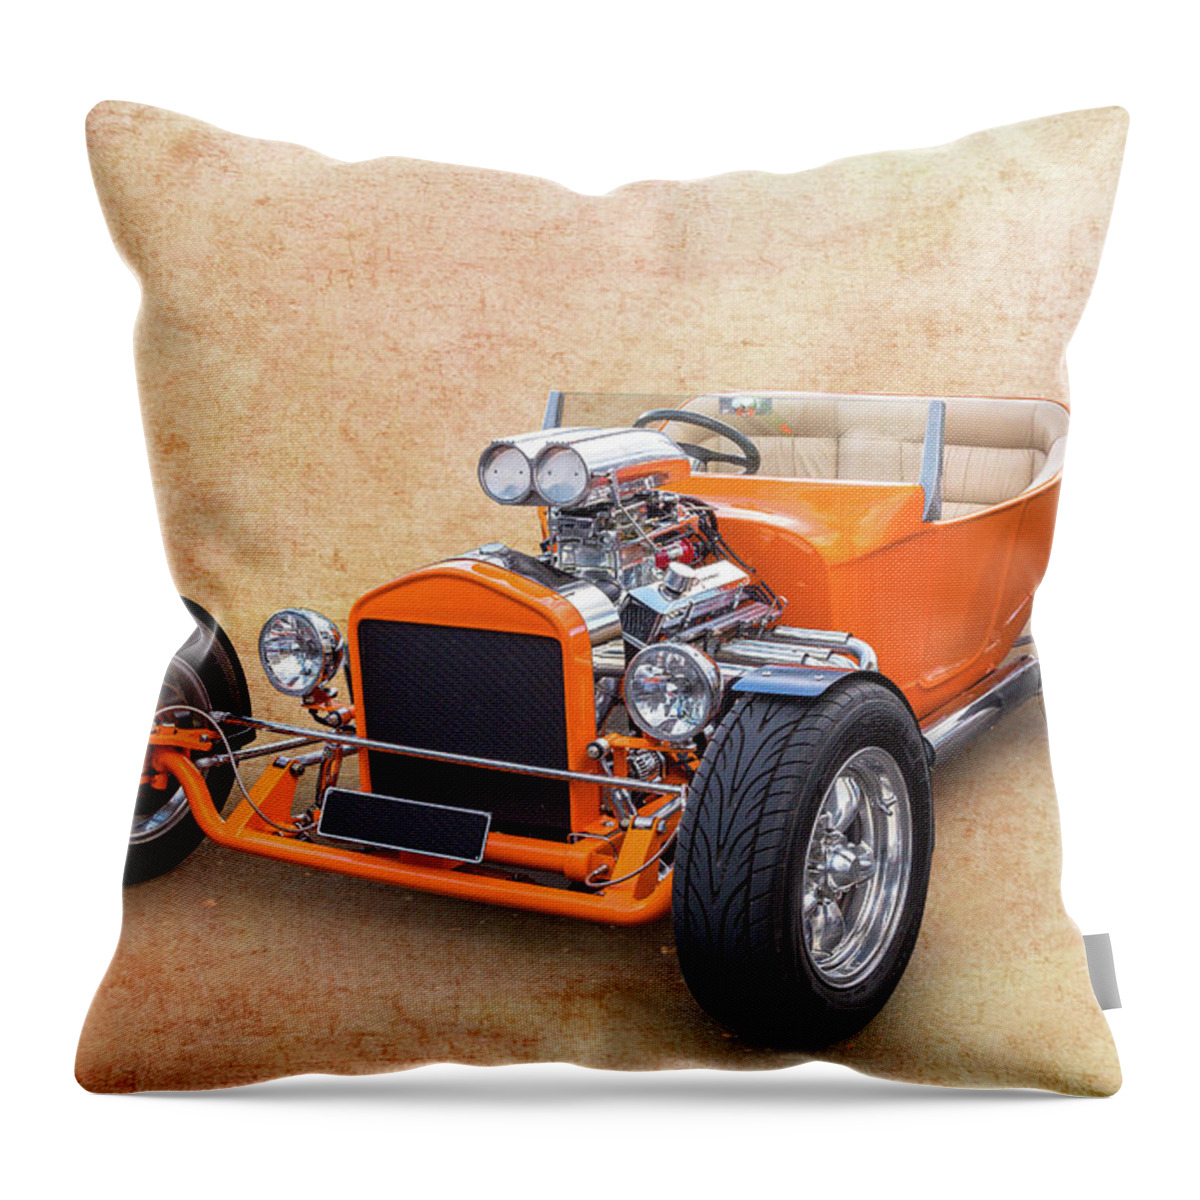  Throw Pillow featuring the photograph Little T by Keith Hawley